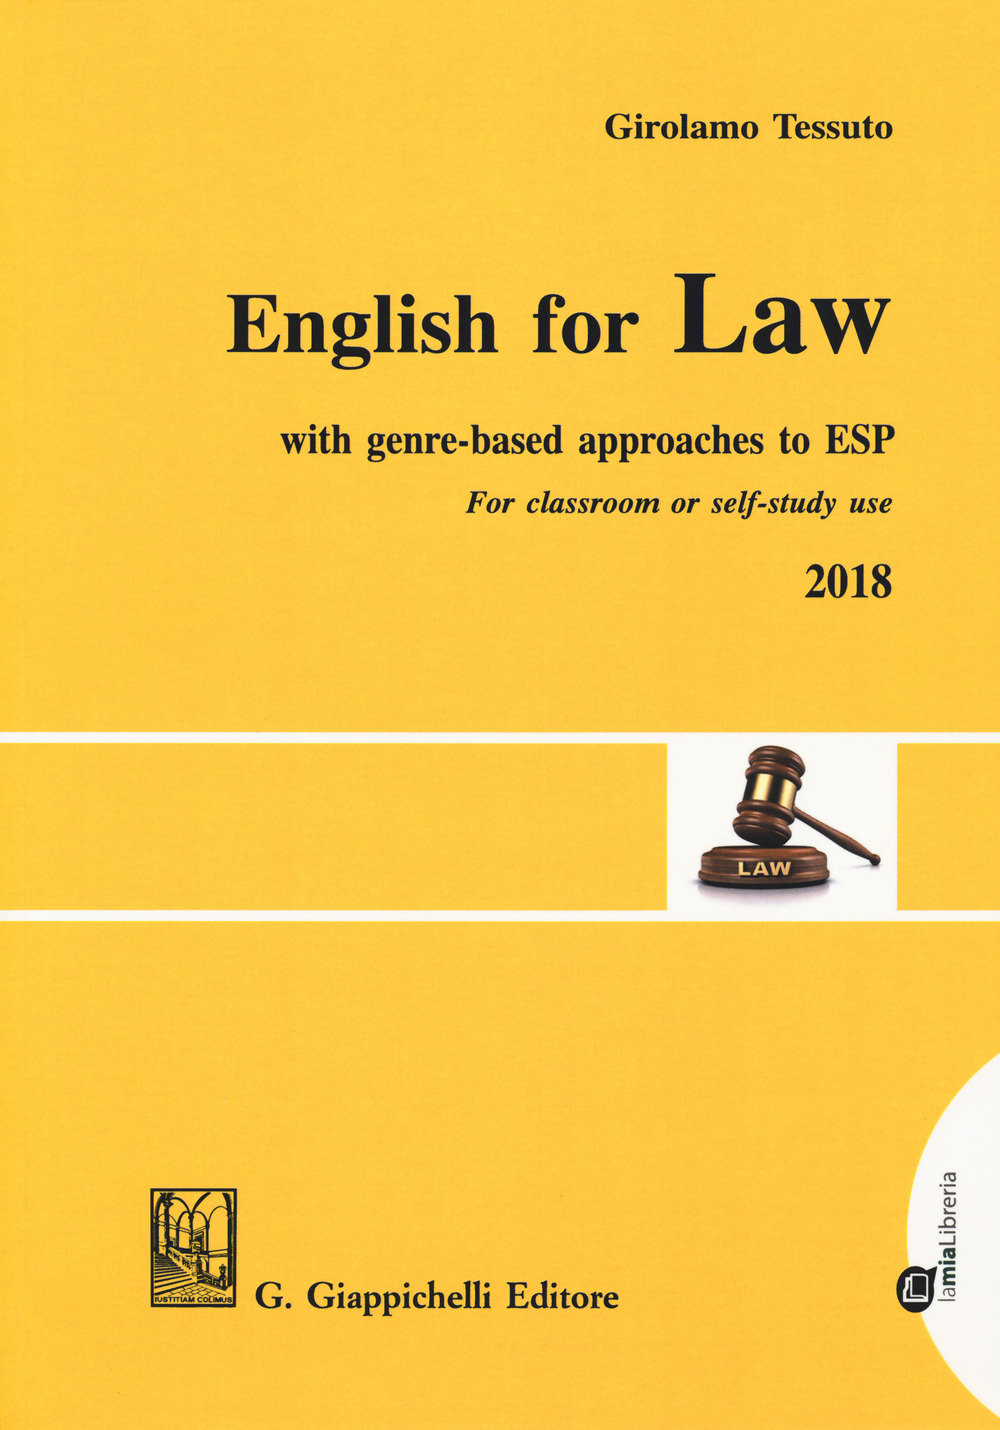 English for law. With genre-based approaches to ESP. For classroom or self-study use 2018